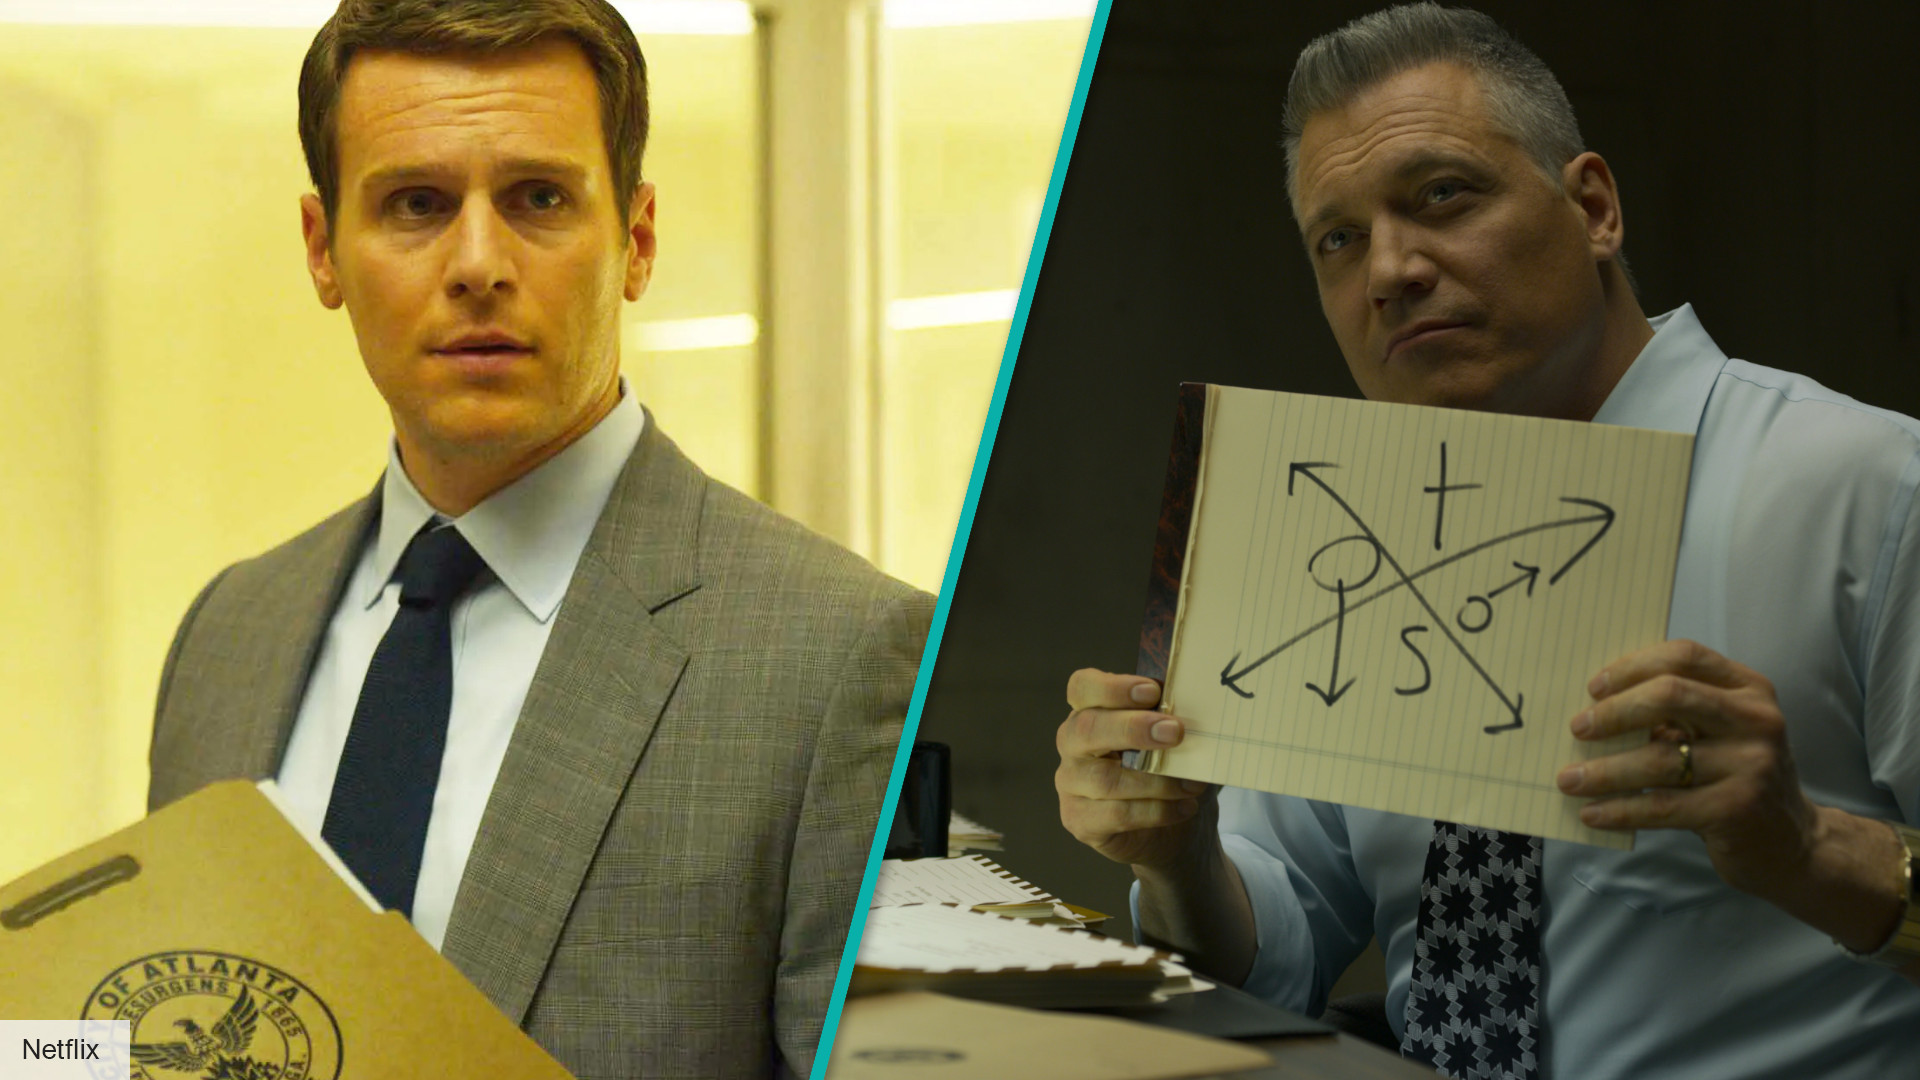 Mindhunter season 3 plans shared by director